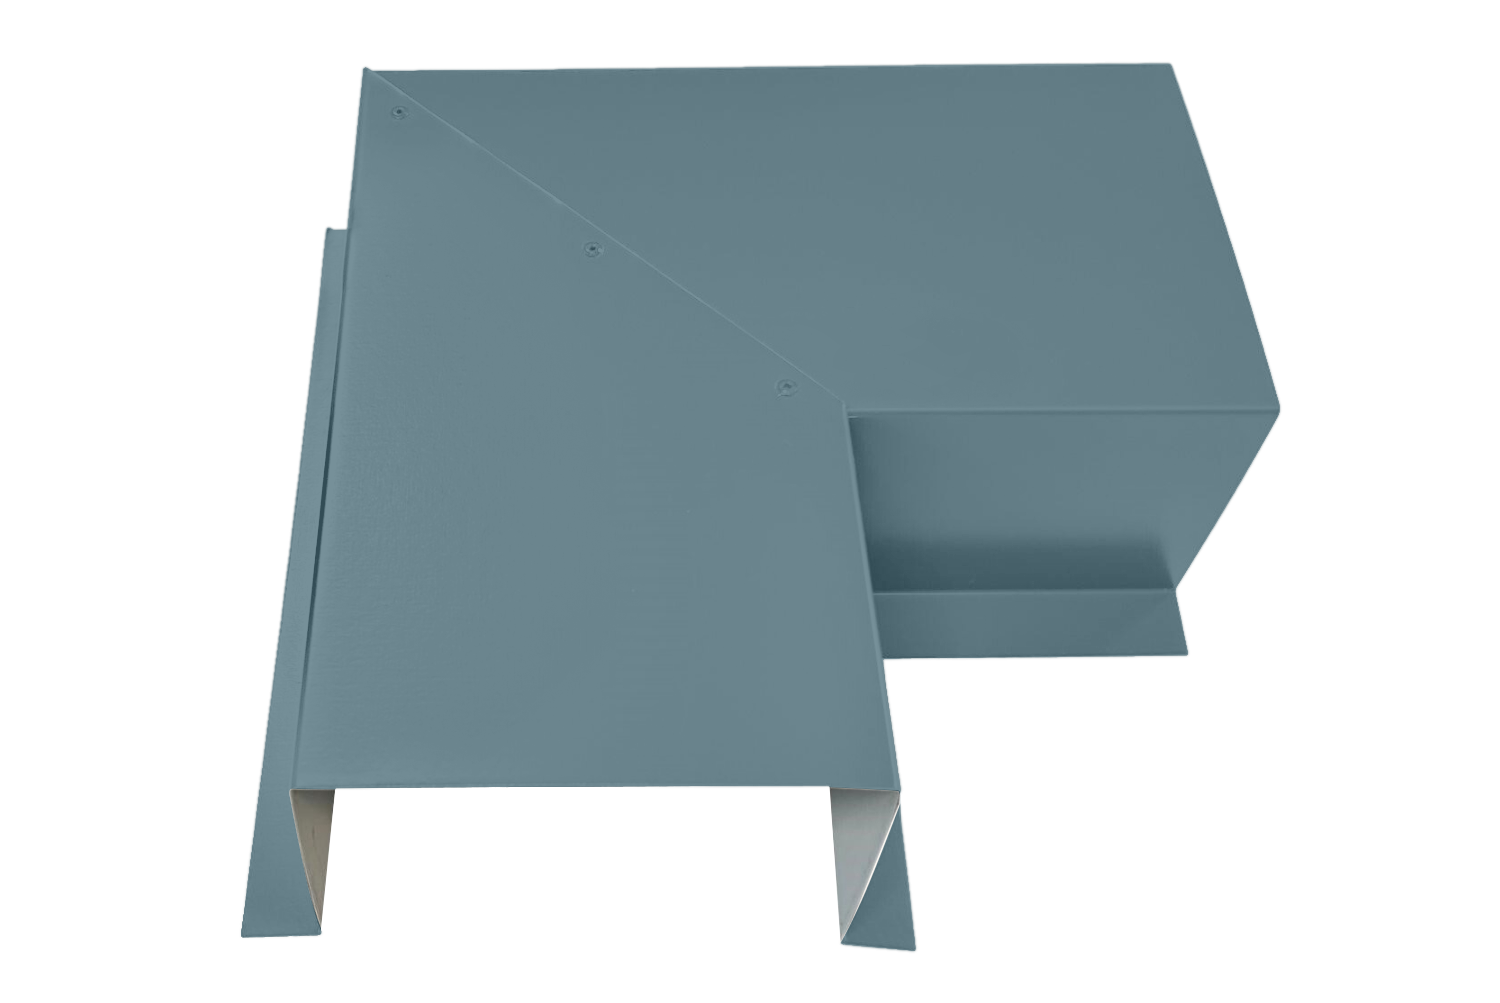 A blue, geometrically-shaped metal object with sharp angles and multiple flat surfaces. The design is abstract with triangular and rectangular sections interconnected, resembling a modern architectural or industrial component ideal for the Perma Cover Residential Series - Line Set Cover Side Turning Elbows - Premium Quality.